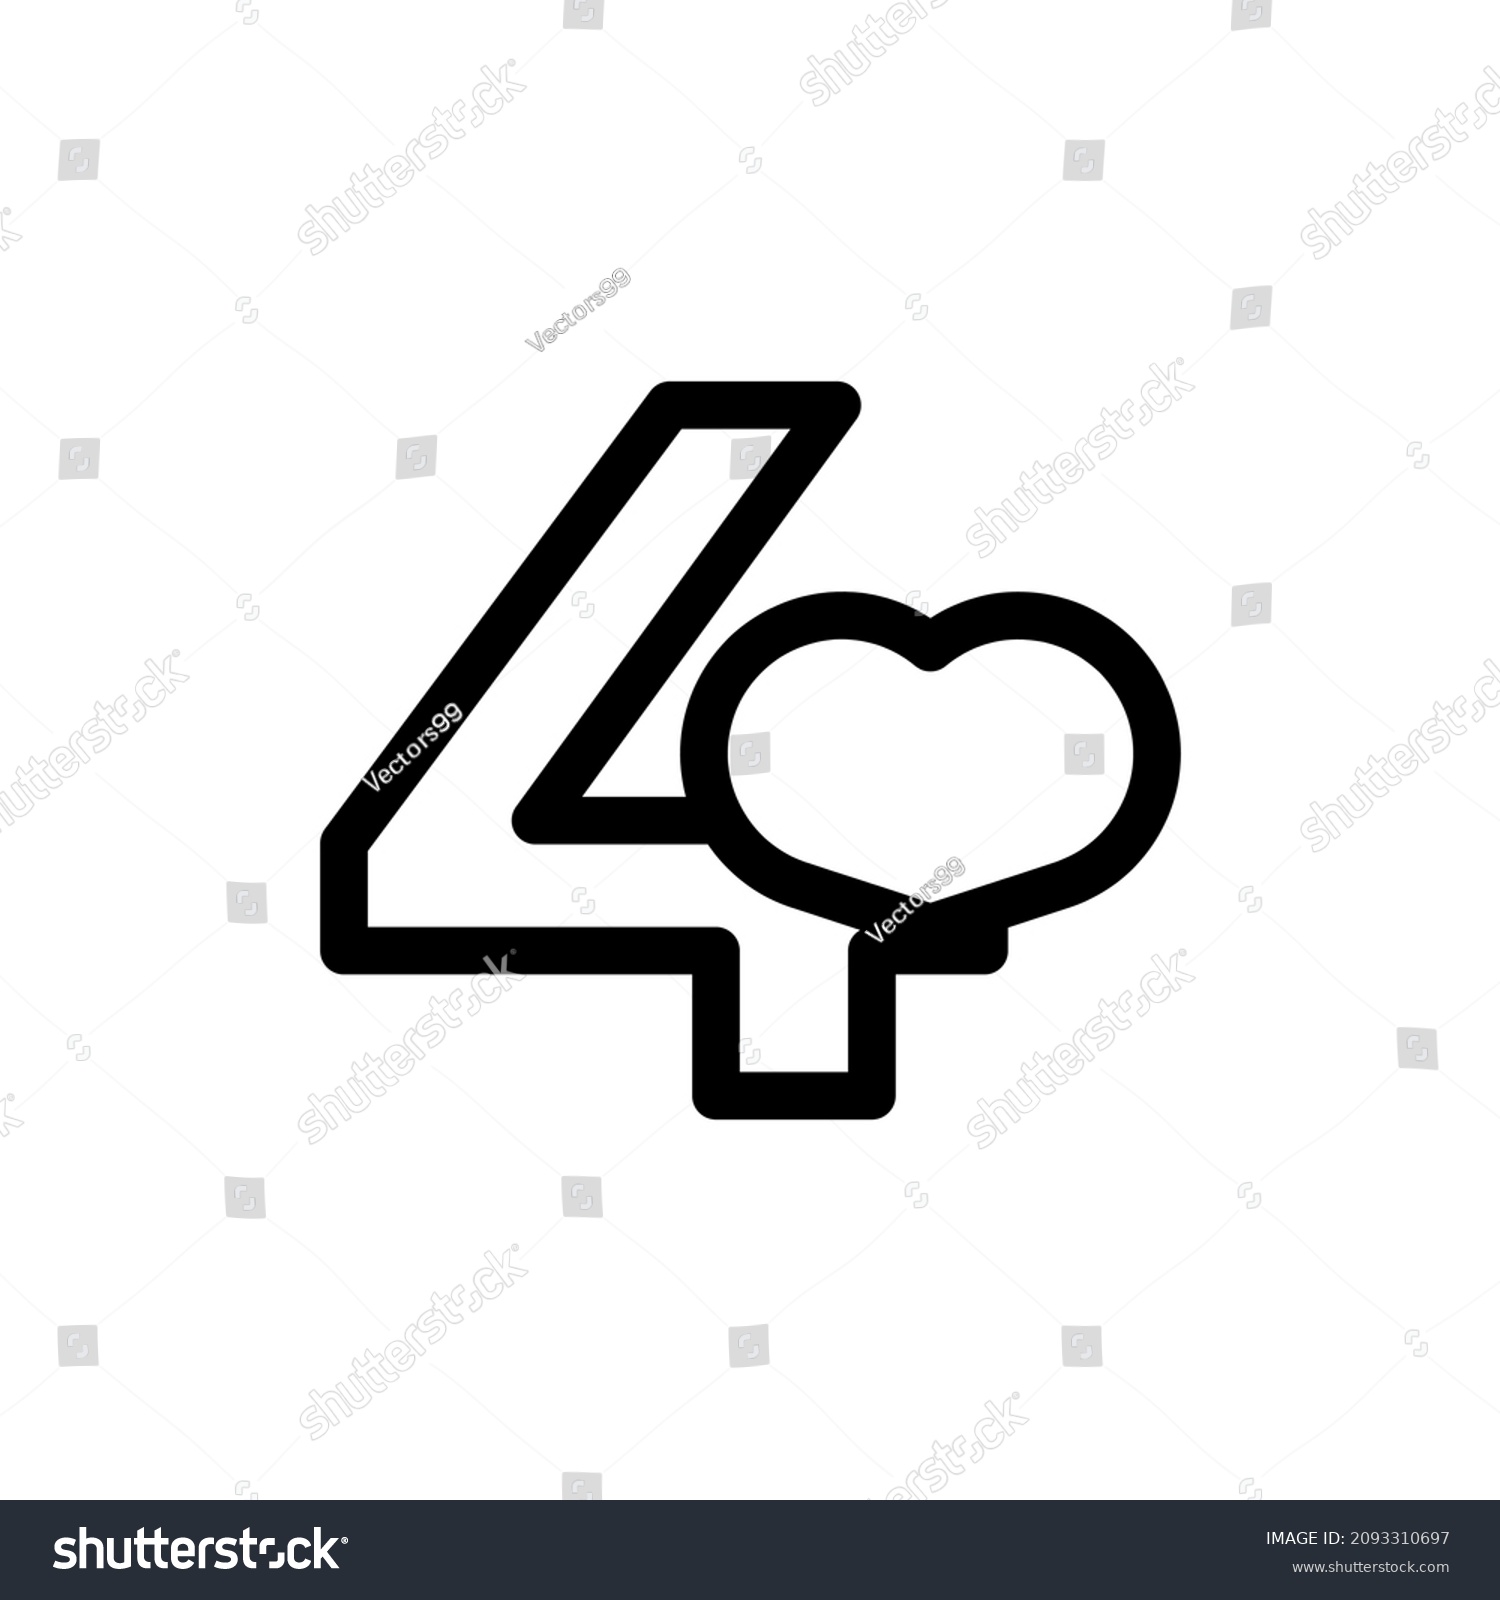 SVG of Number 4 with Heart Love in Line Style Logo Design Template Element svg